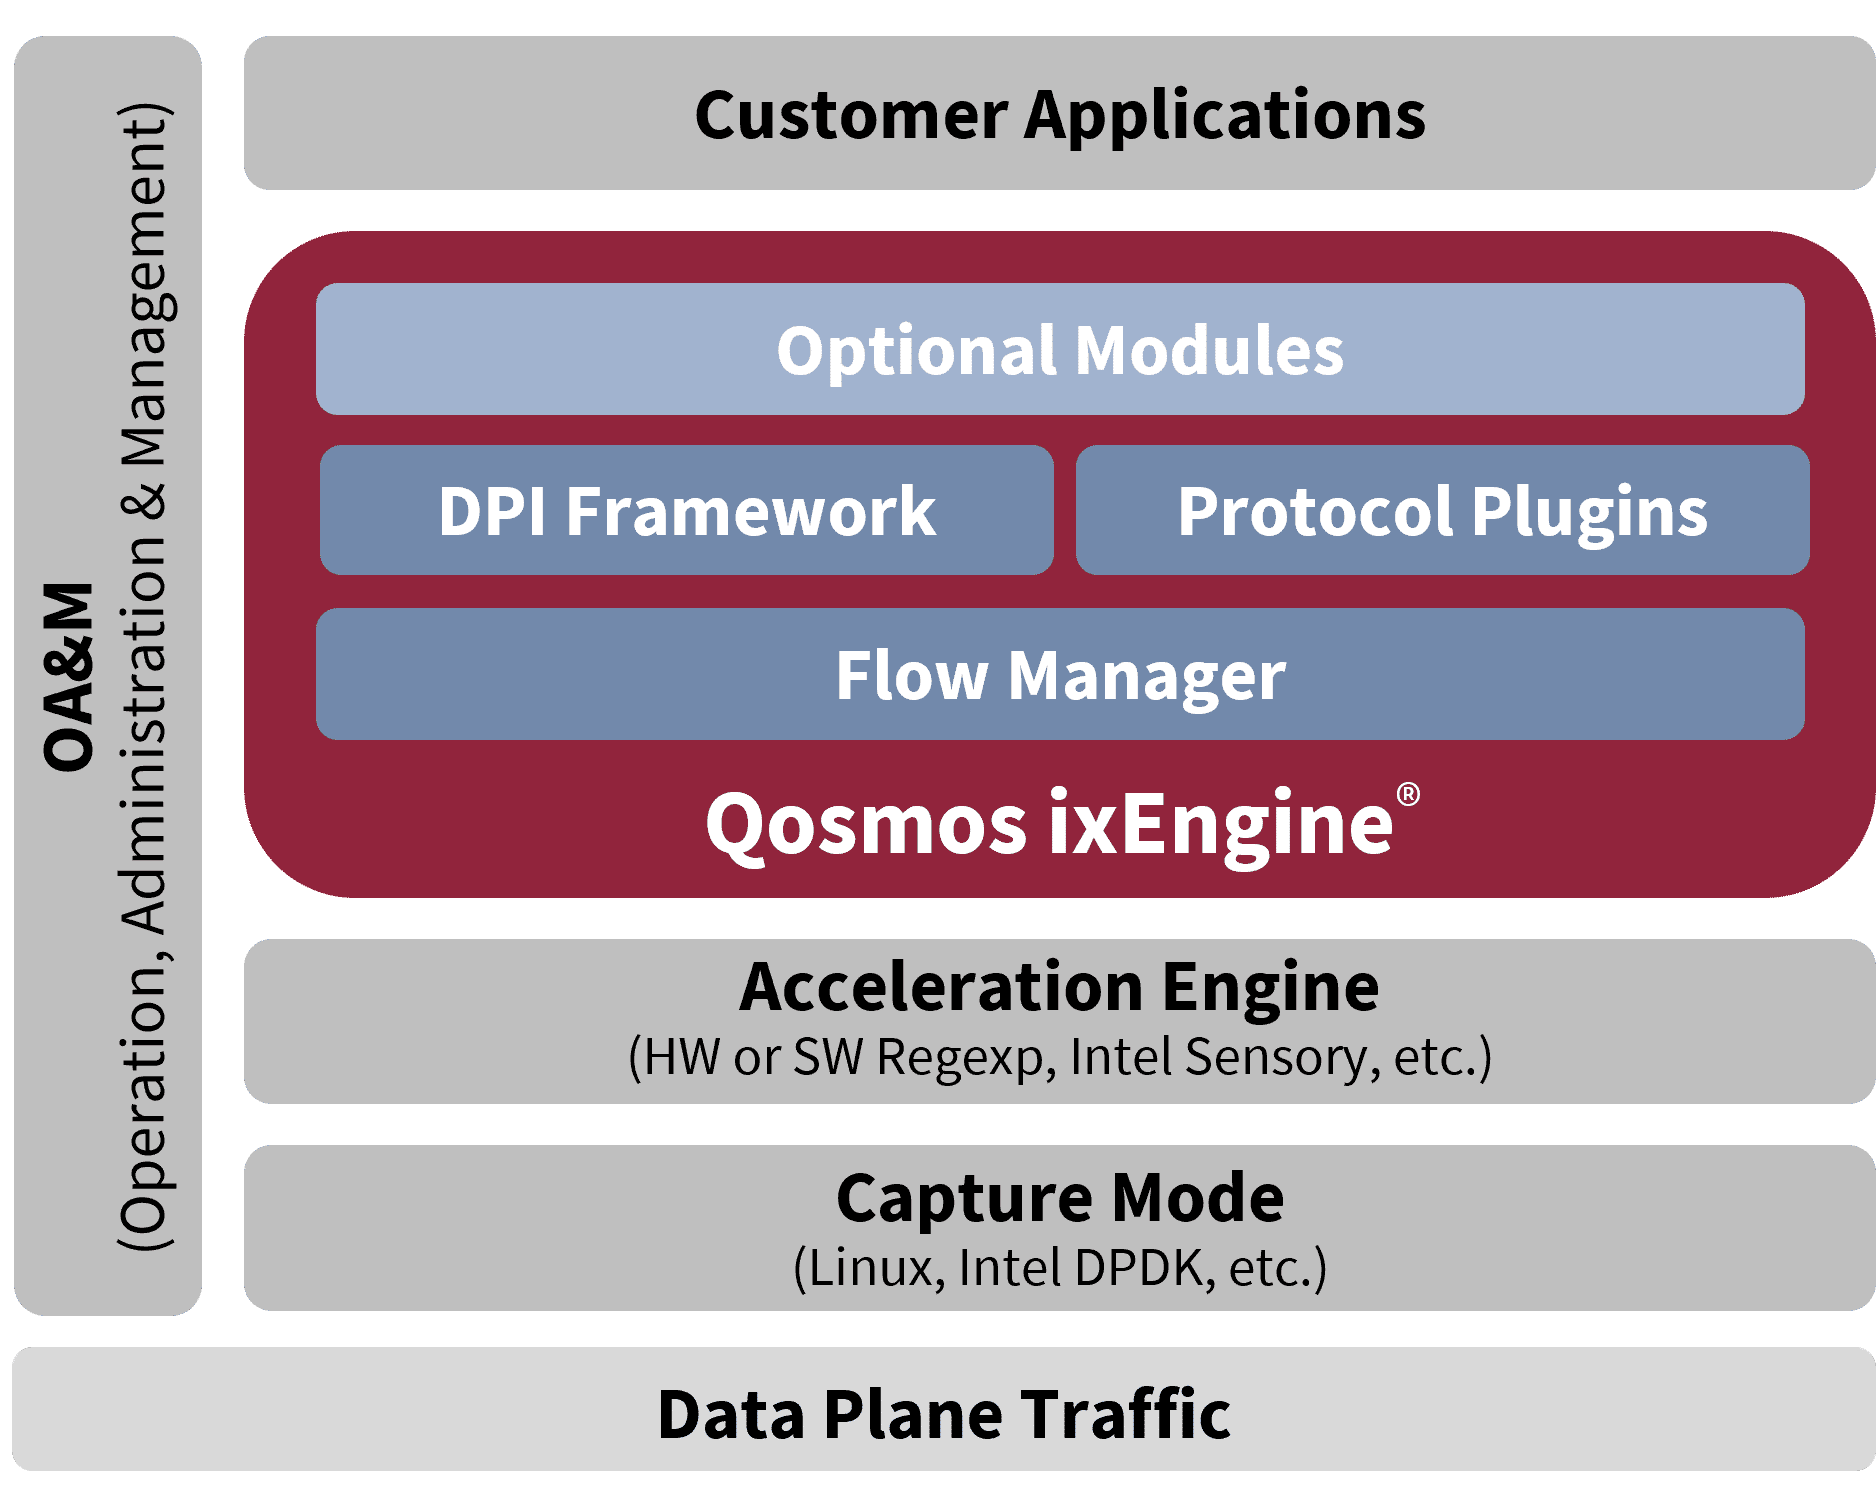 Enea Qosmos ixEngine is a Next-Generation DPI engine that goes beyond IP traffic classification and extracts metadata